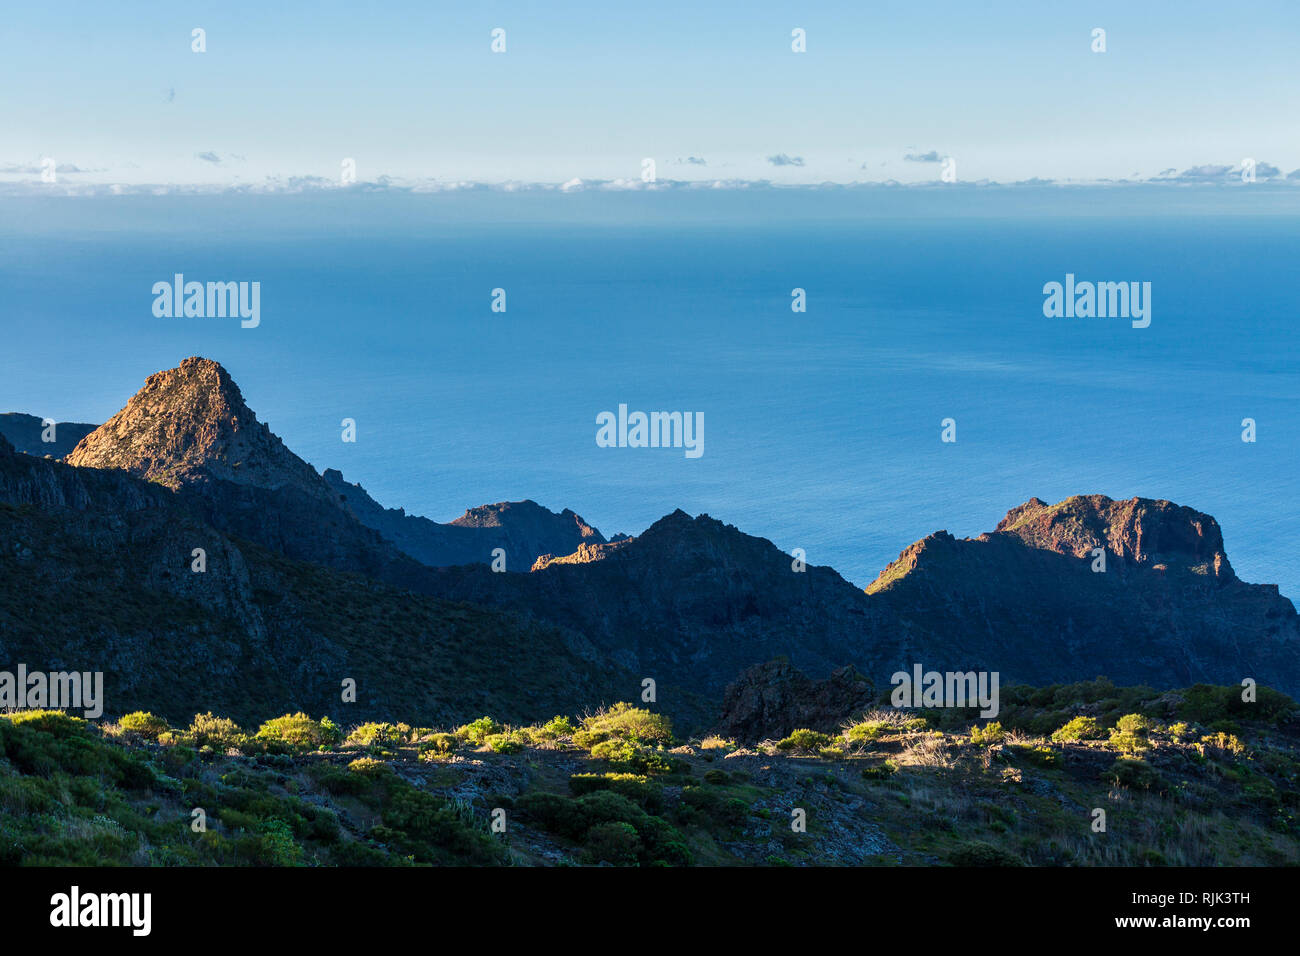 Dawn sunlight lights up the Risco Blanco and ridges over the Masca barranco in the Teno region of Tenerife, Canary Islands, Spain Stock Photo